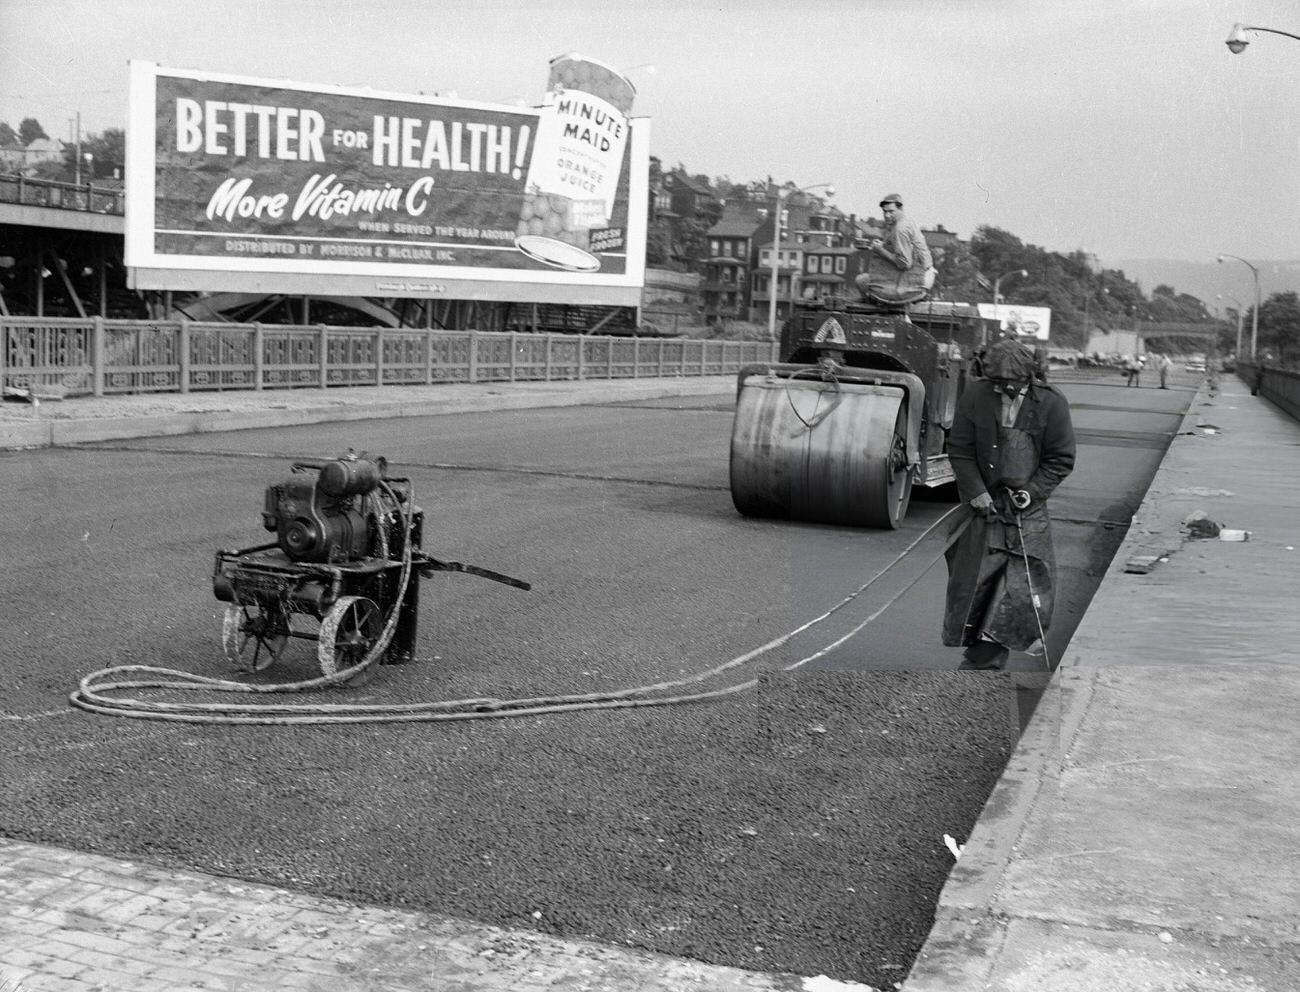 Two men paving a road with a steam roller, with a Minute Maid orange juice billboard in the background, 1960s